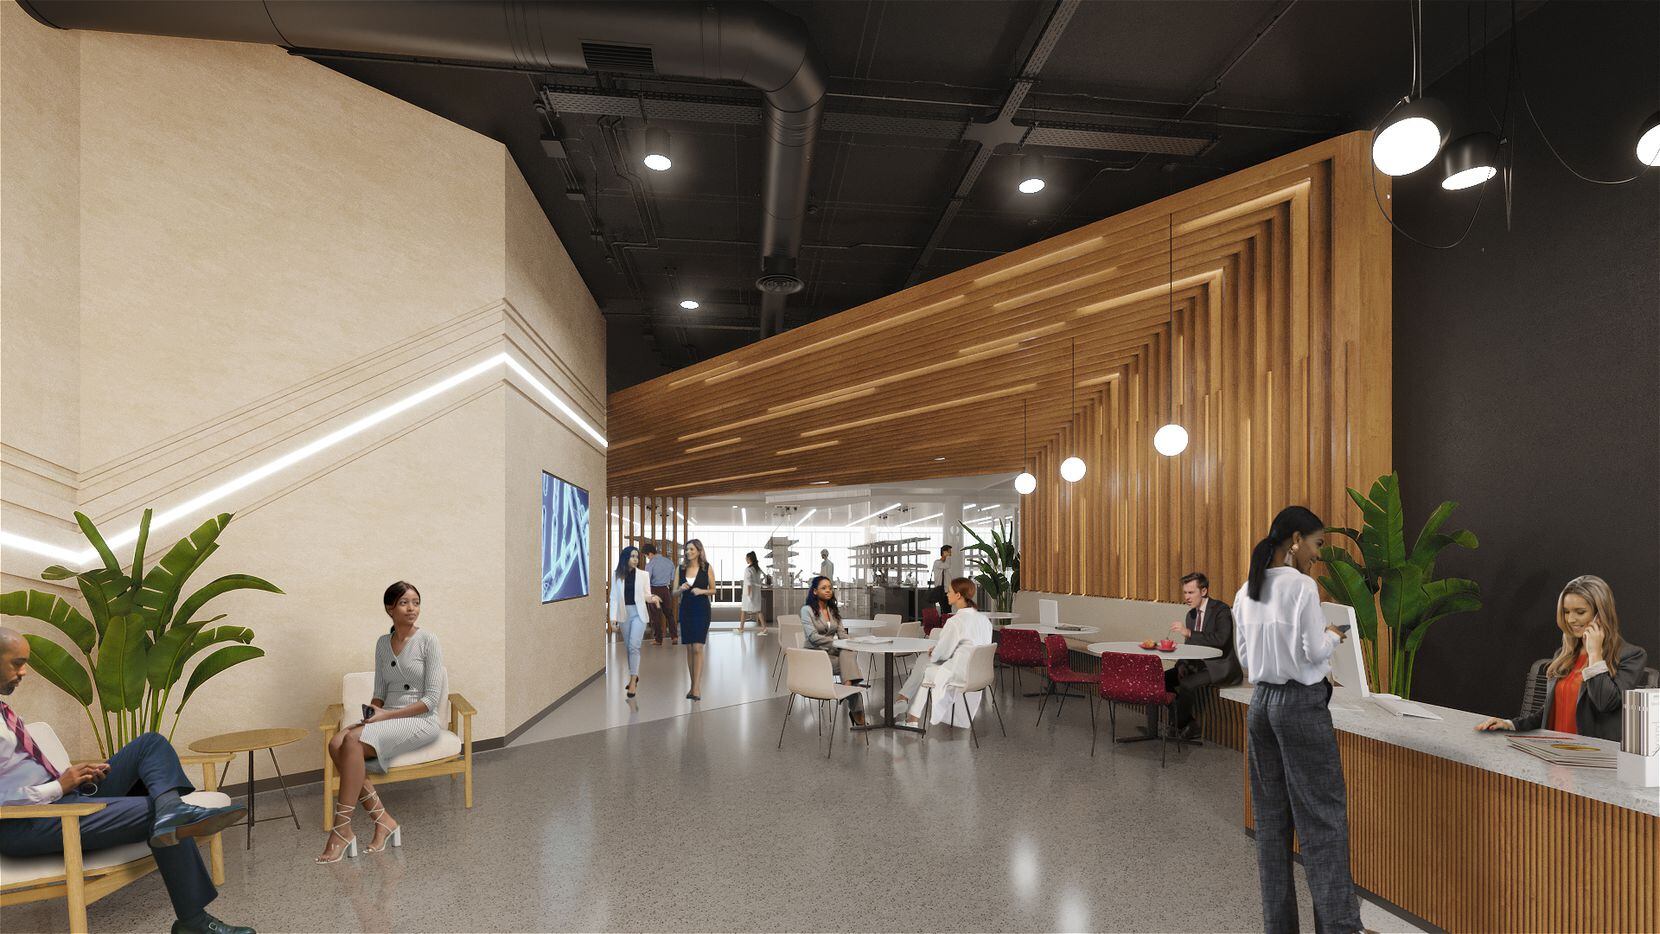 A rendering of the reception space in the labs.